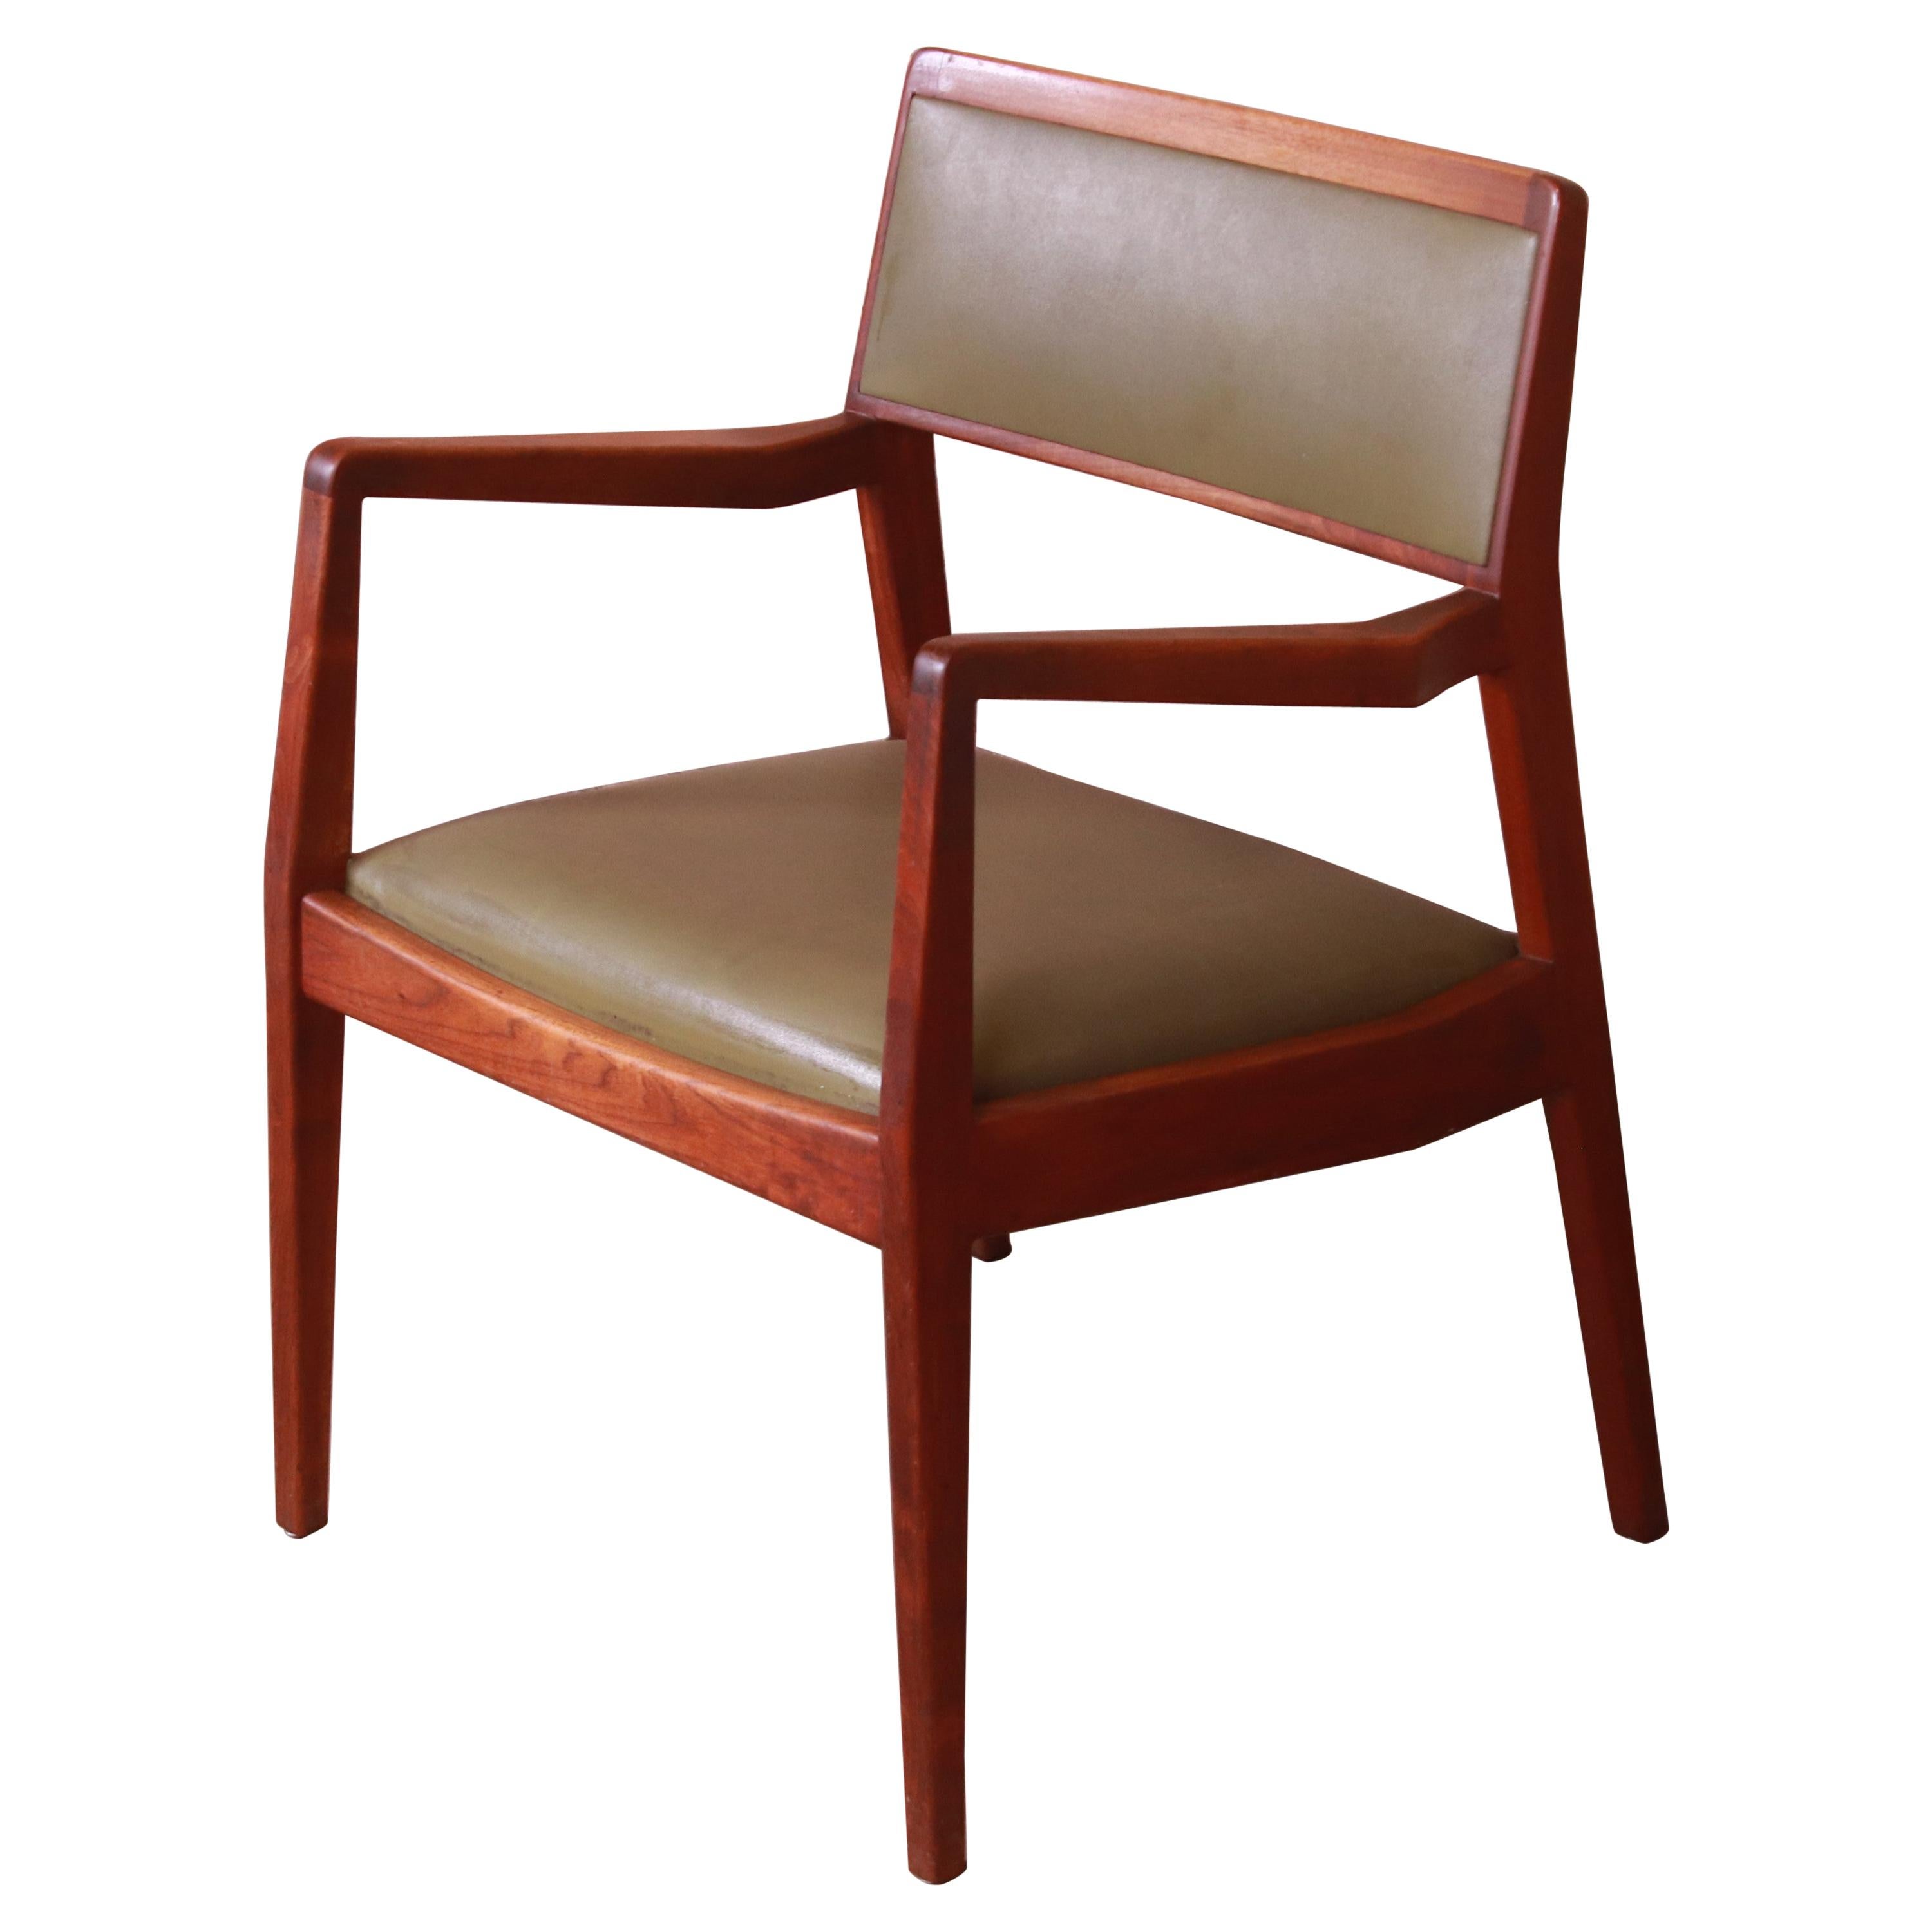 Jens Risom Mid-Century Modern Sculpted Walnut Playboy Lounge Chair, 1960s For Sale